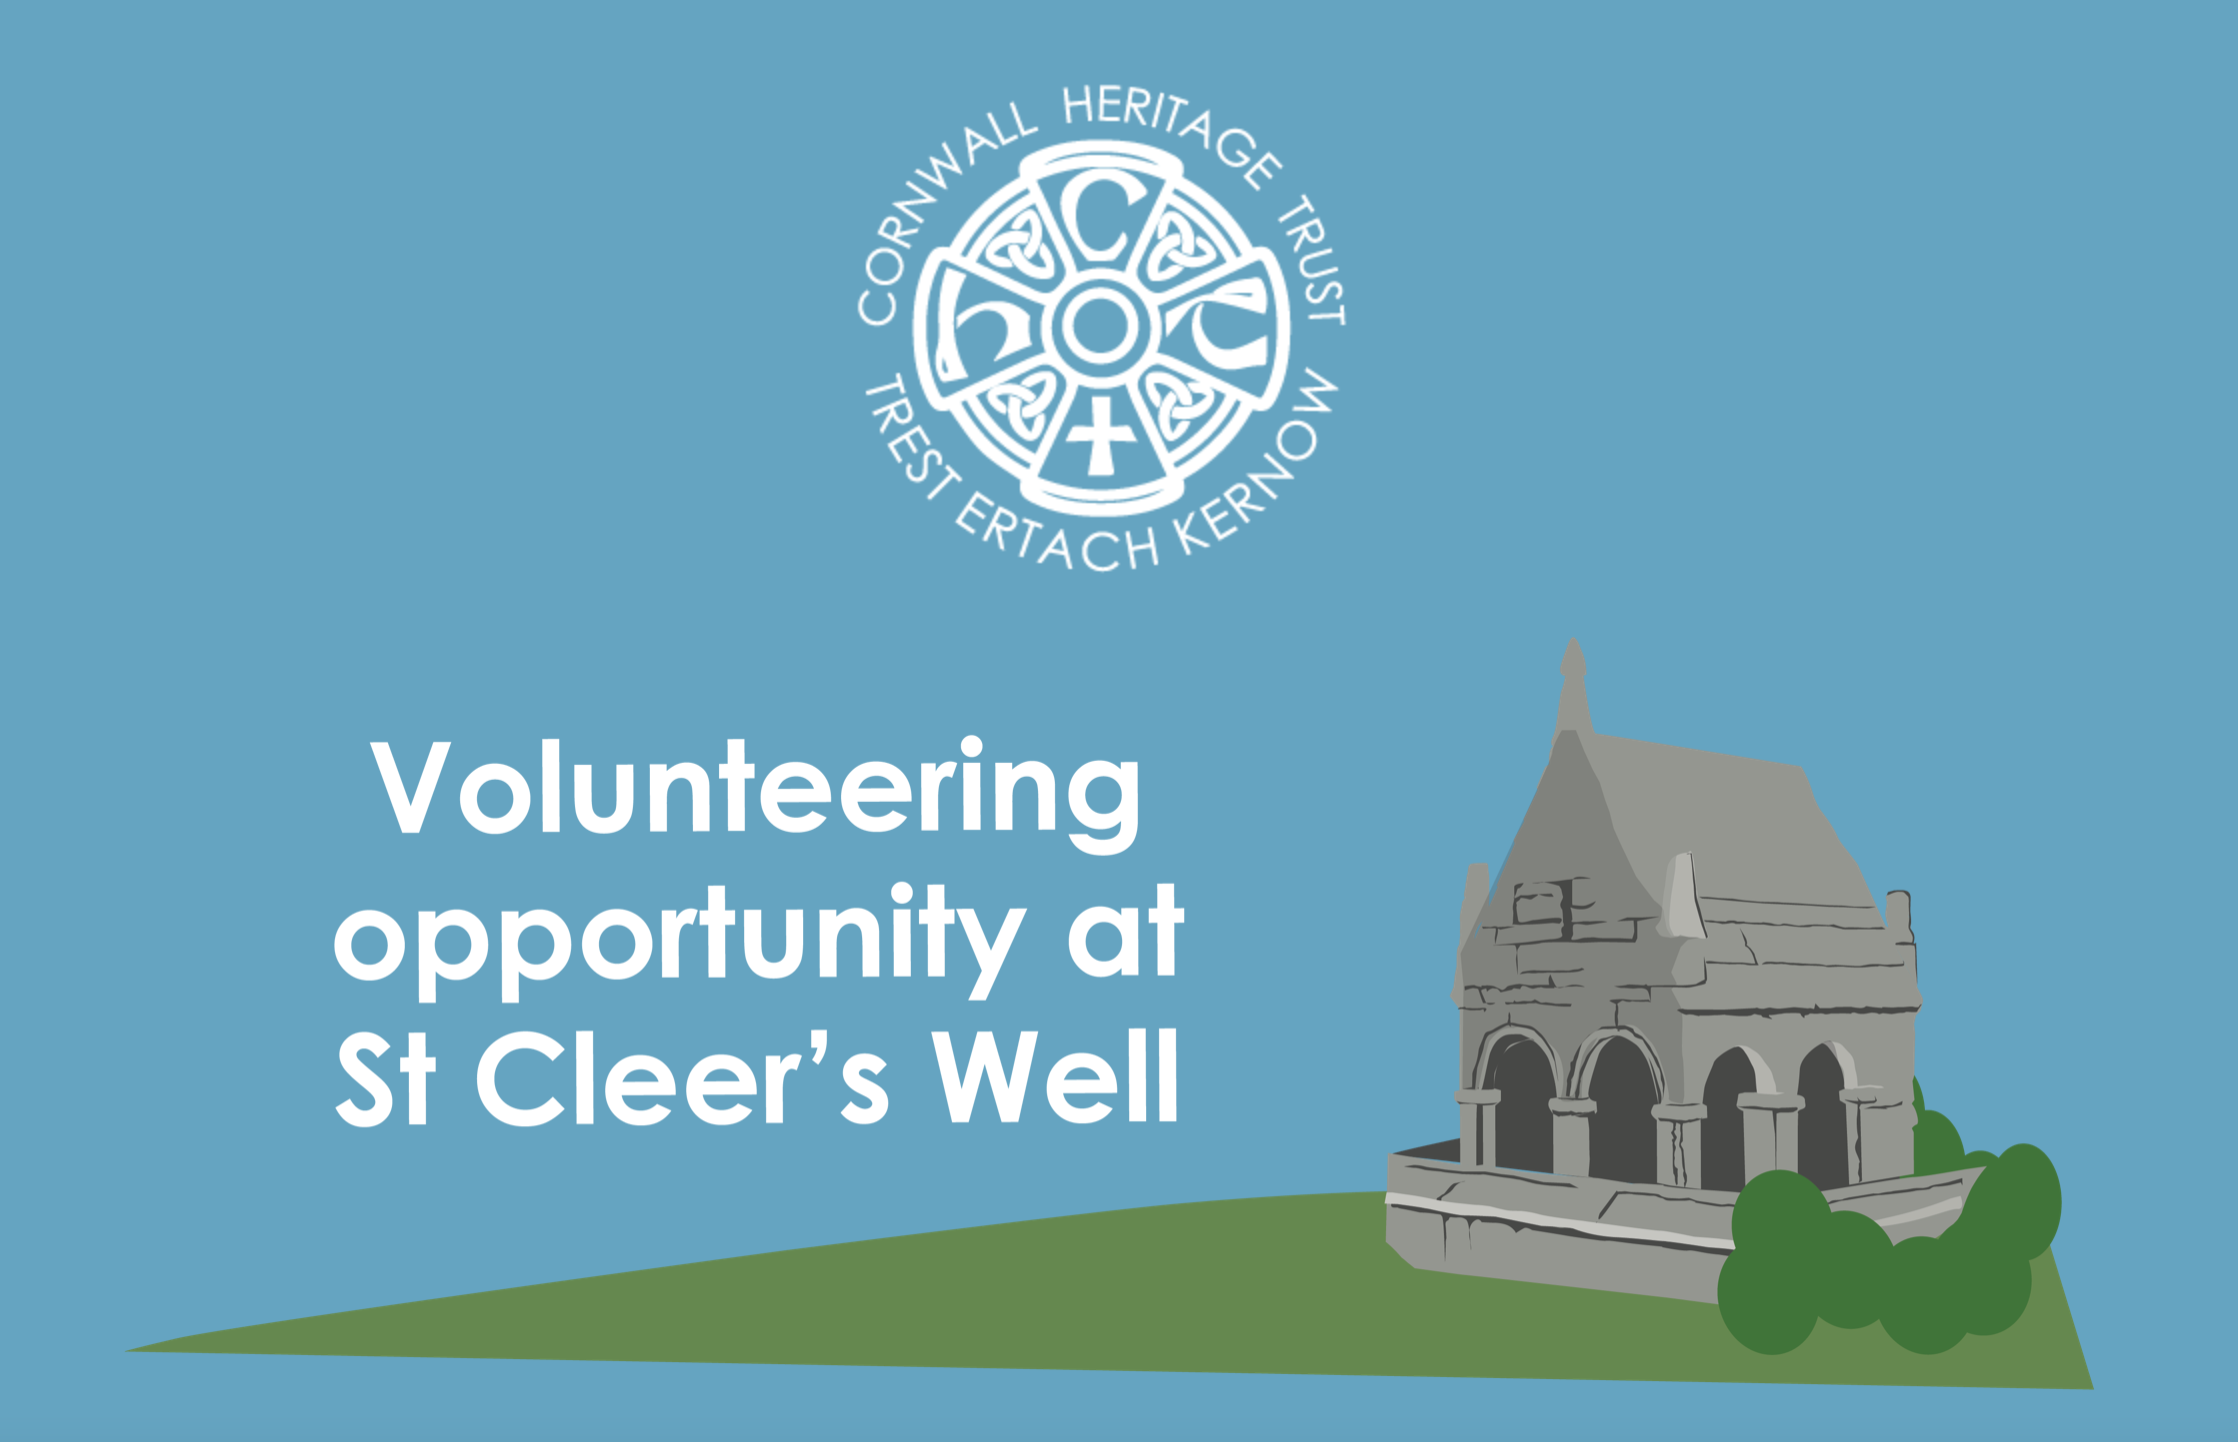 St Cleer Holy Well - volunteer opportunity